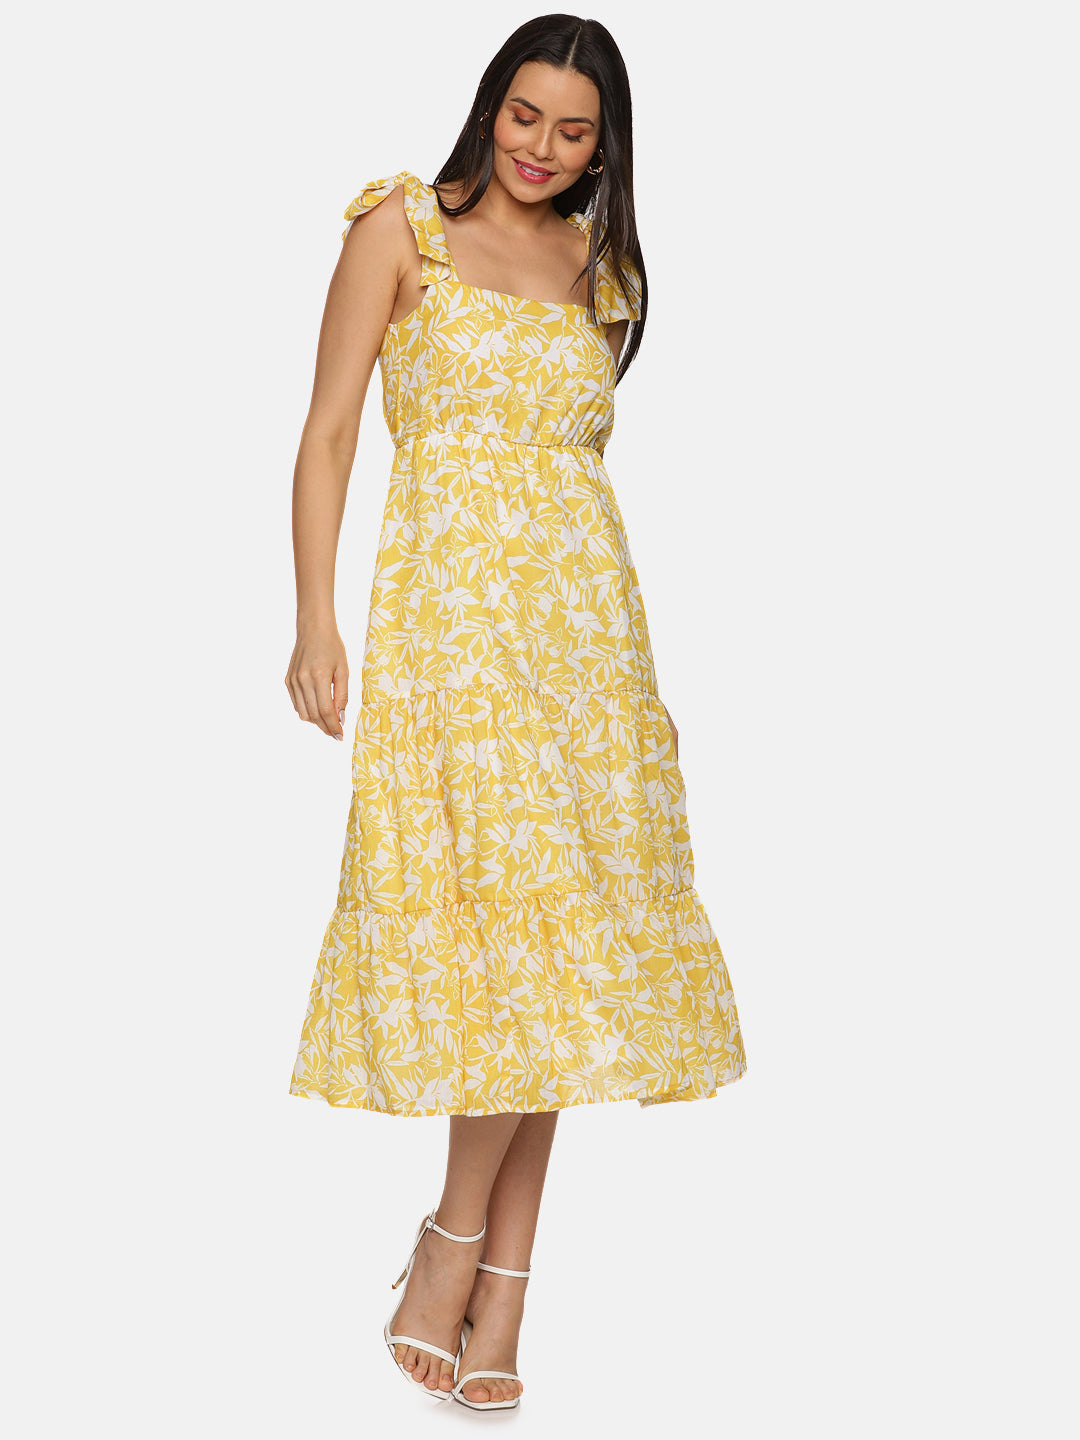 IS.U Floral Yellow Tie-up Dress